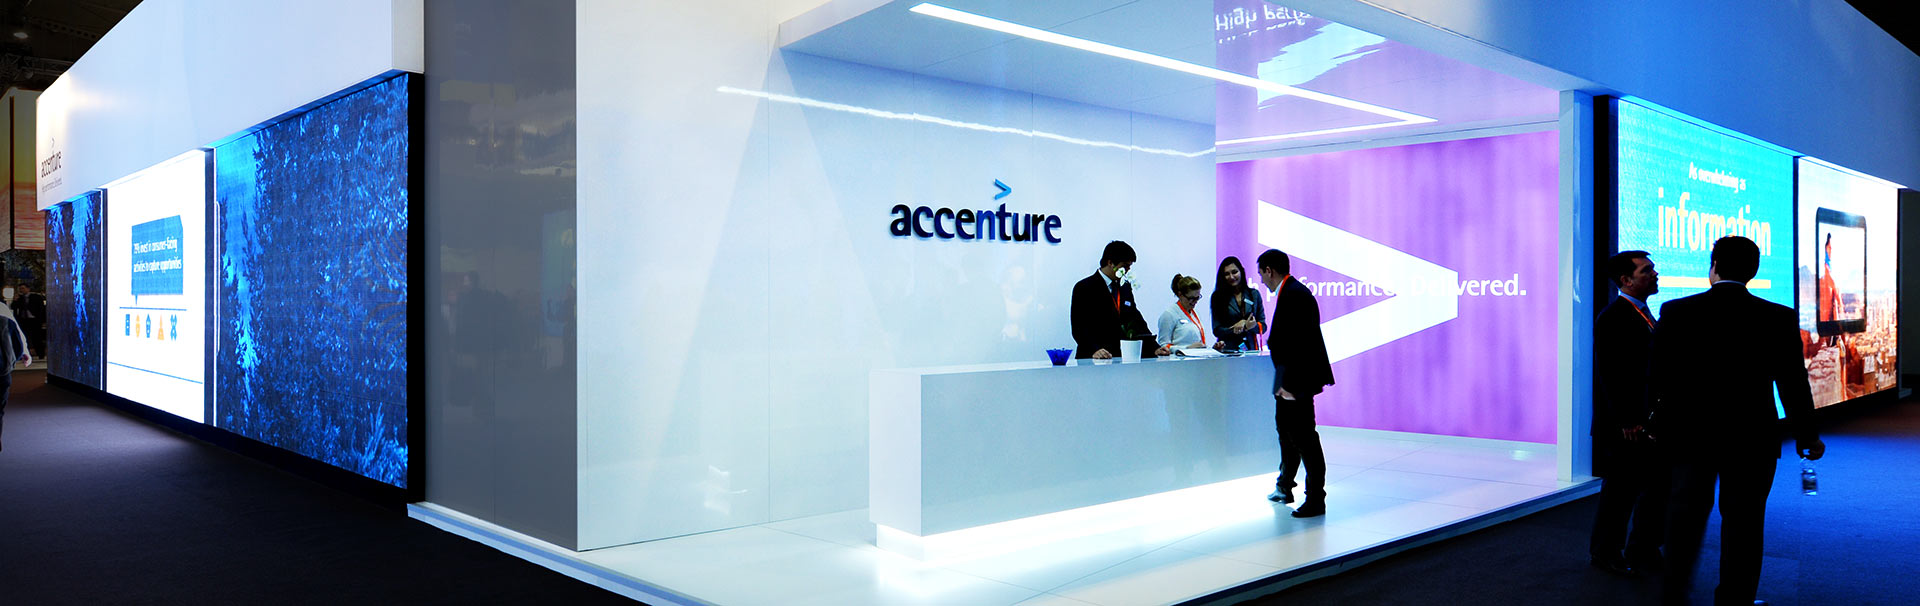 Large wall side exhibition set led screen for Accenture